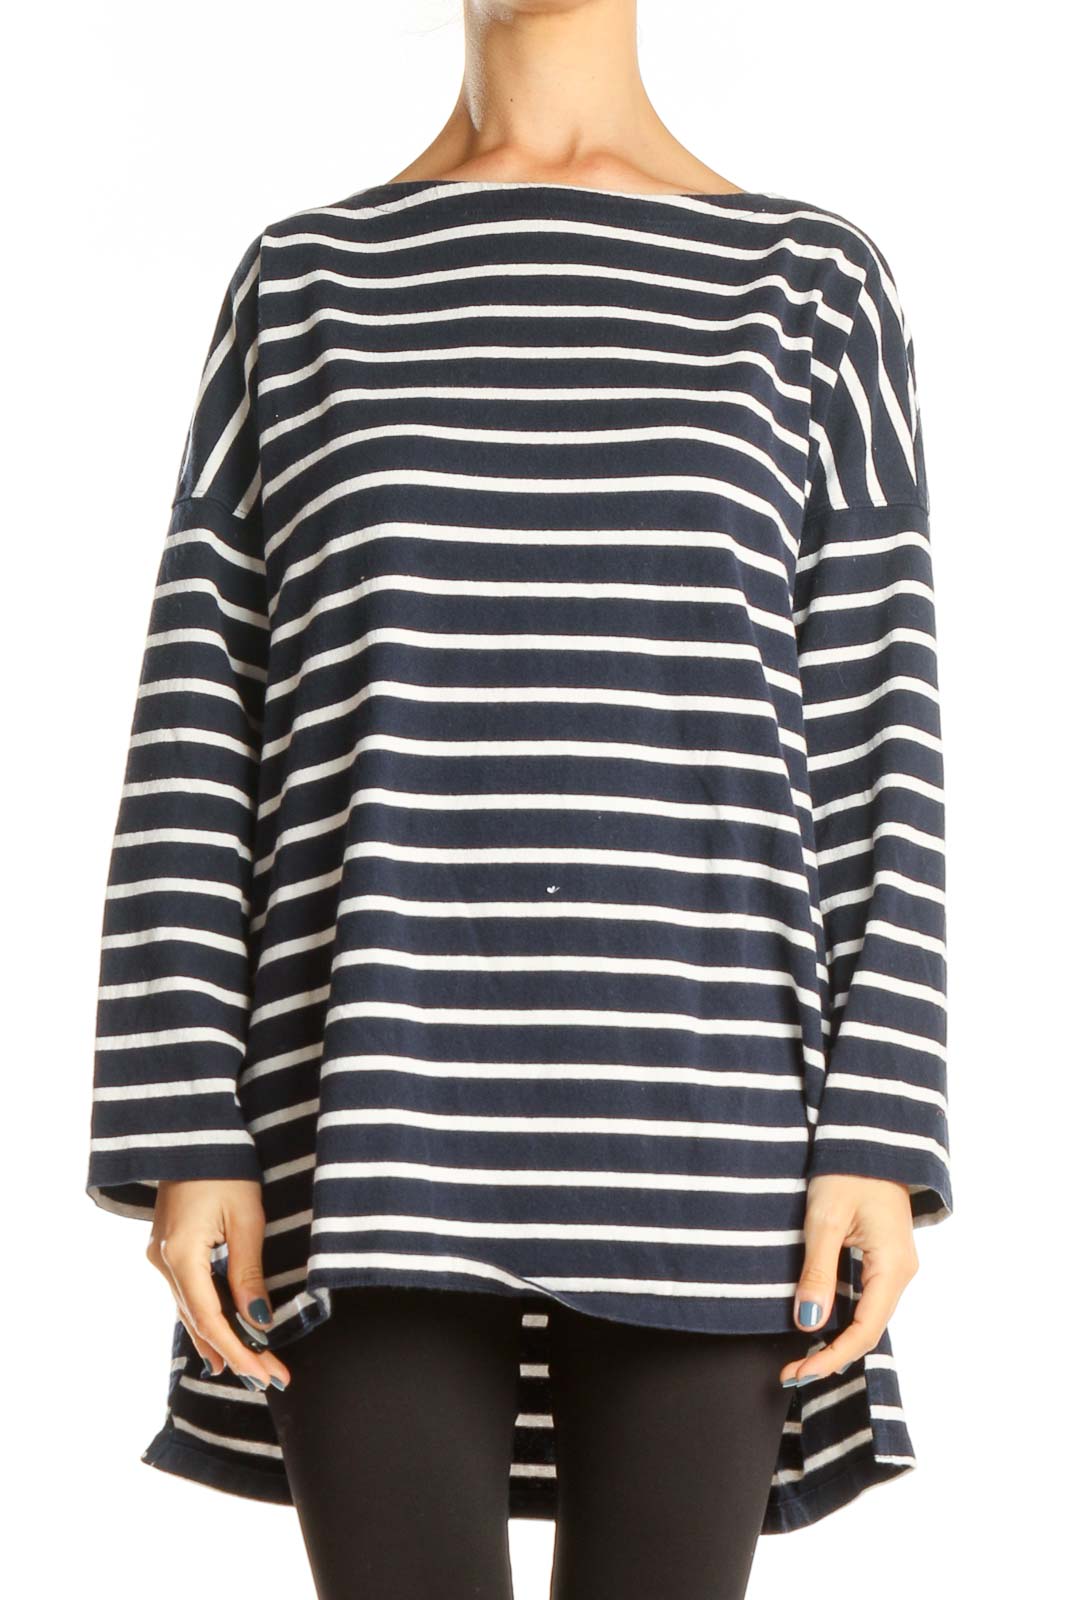 Blue Striped Classic Top Front